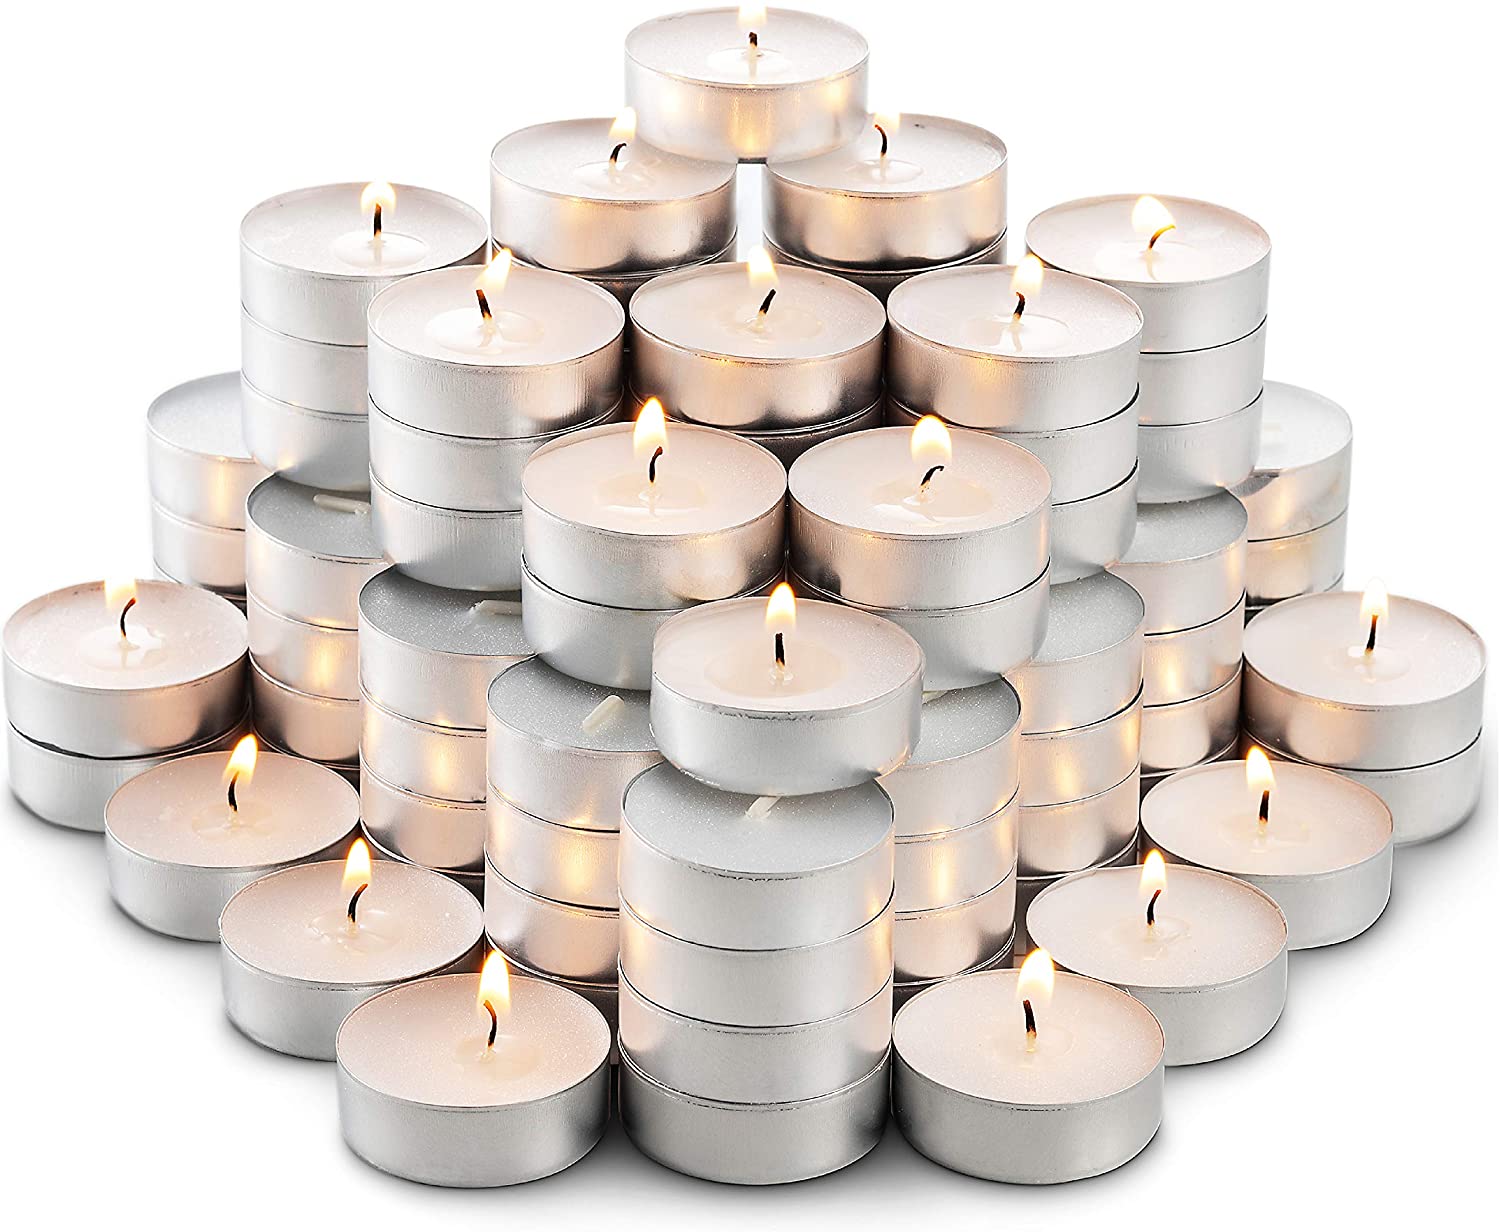 Montopack Unscented Smokeless White Tealight Candles 100 Pack